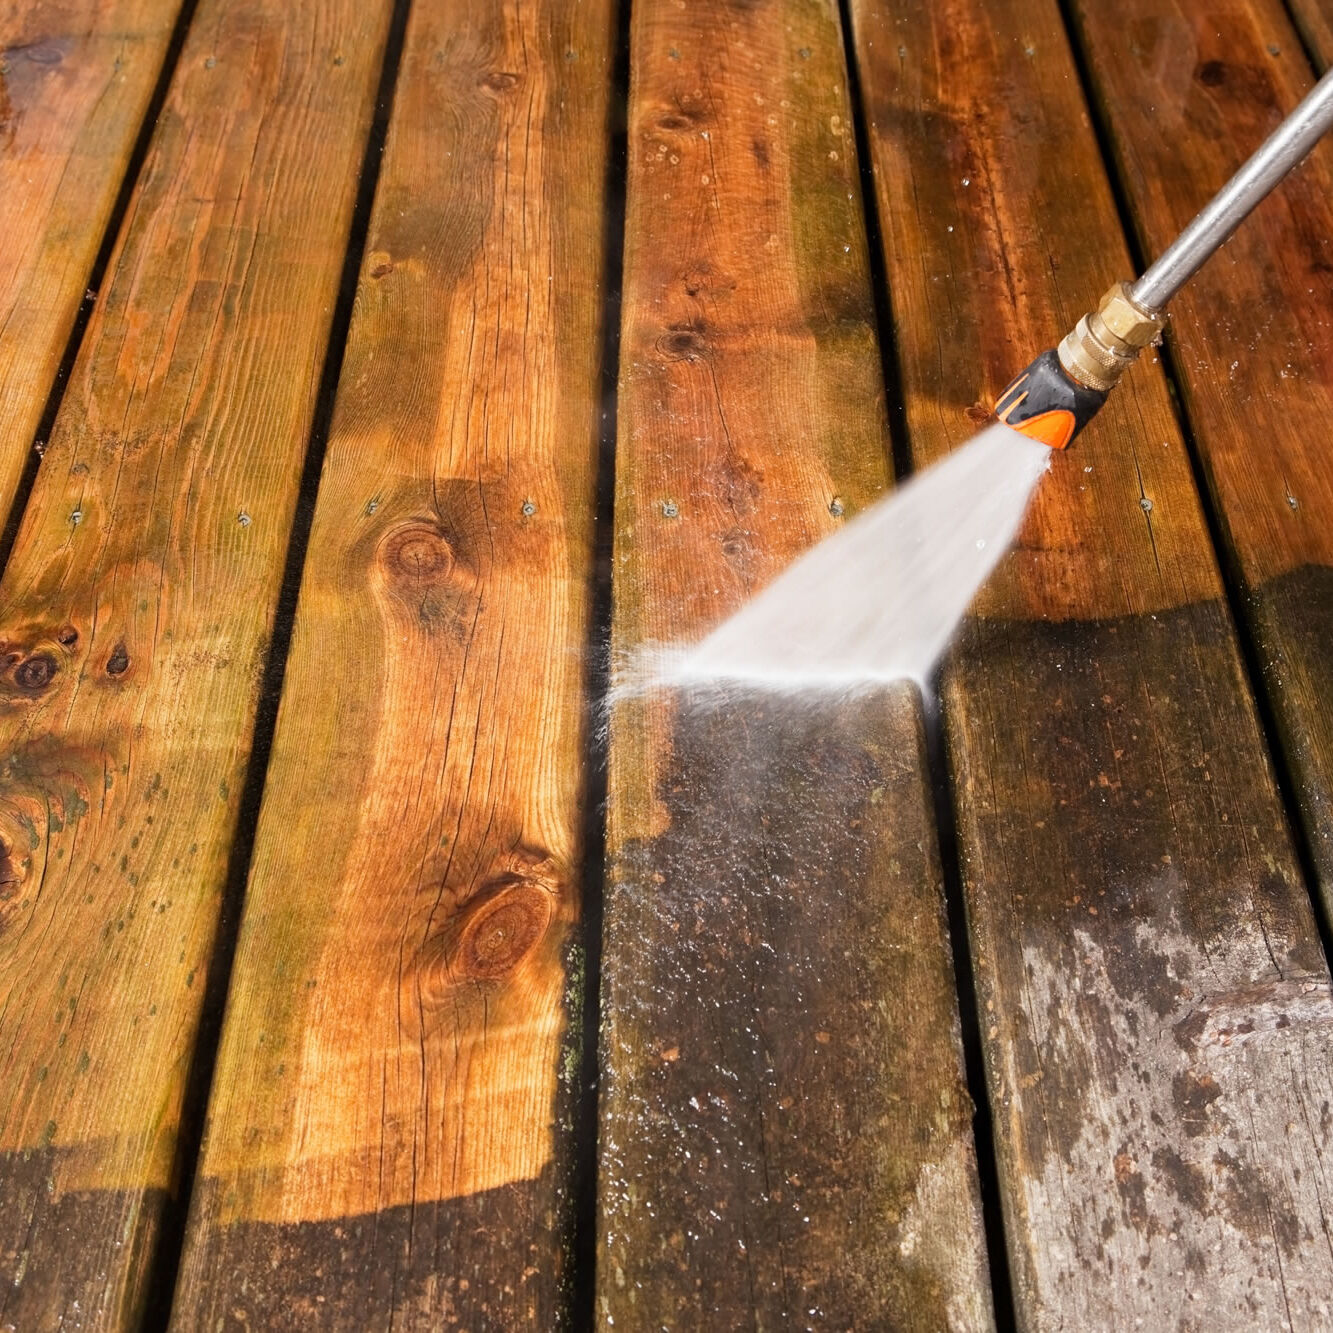 High pressure cleaning for your home